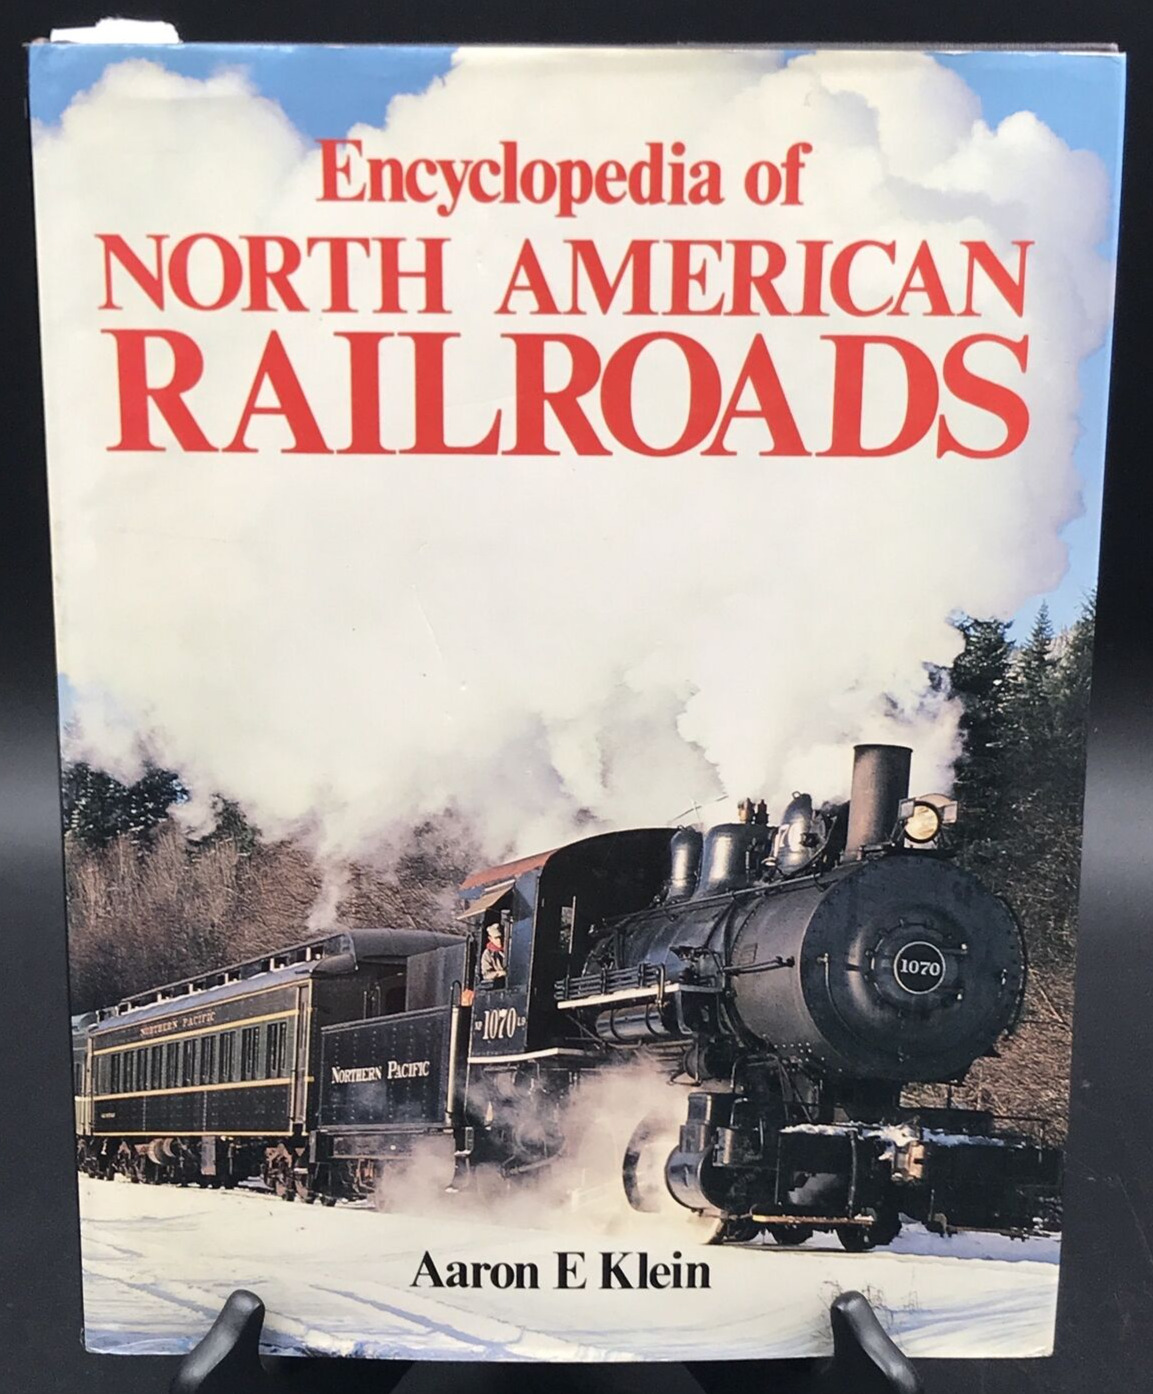 1985 Encyclopedia of North American Railroads by Aaron E Klein Exeter Books HC